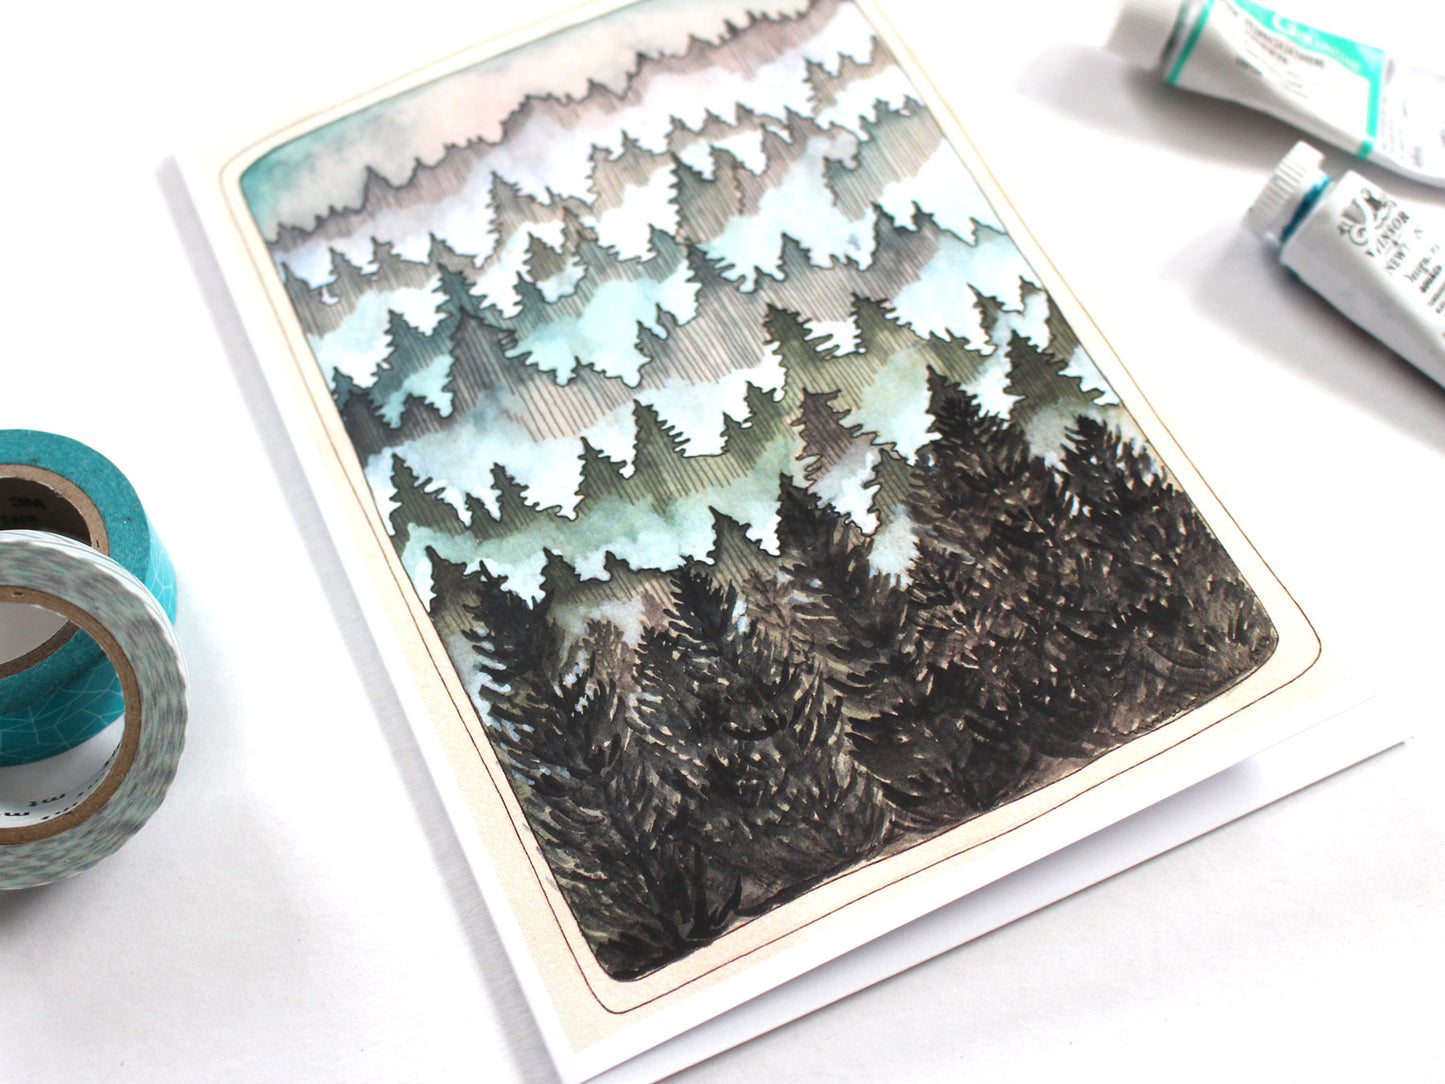 Forest Greeting Card